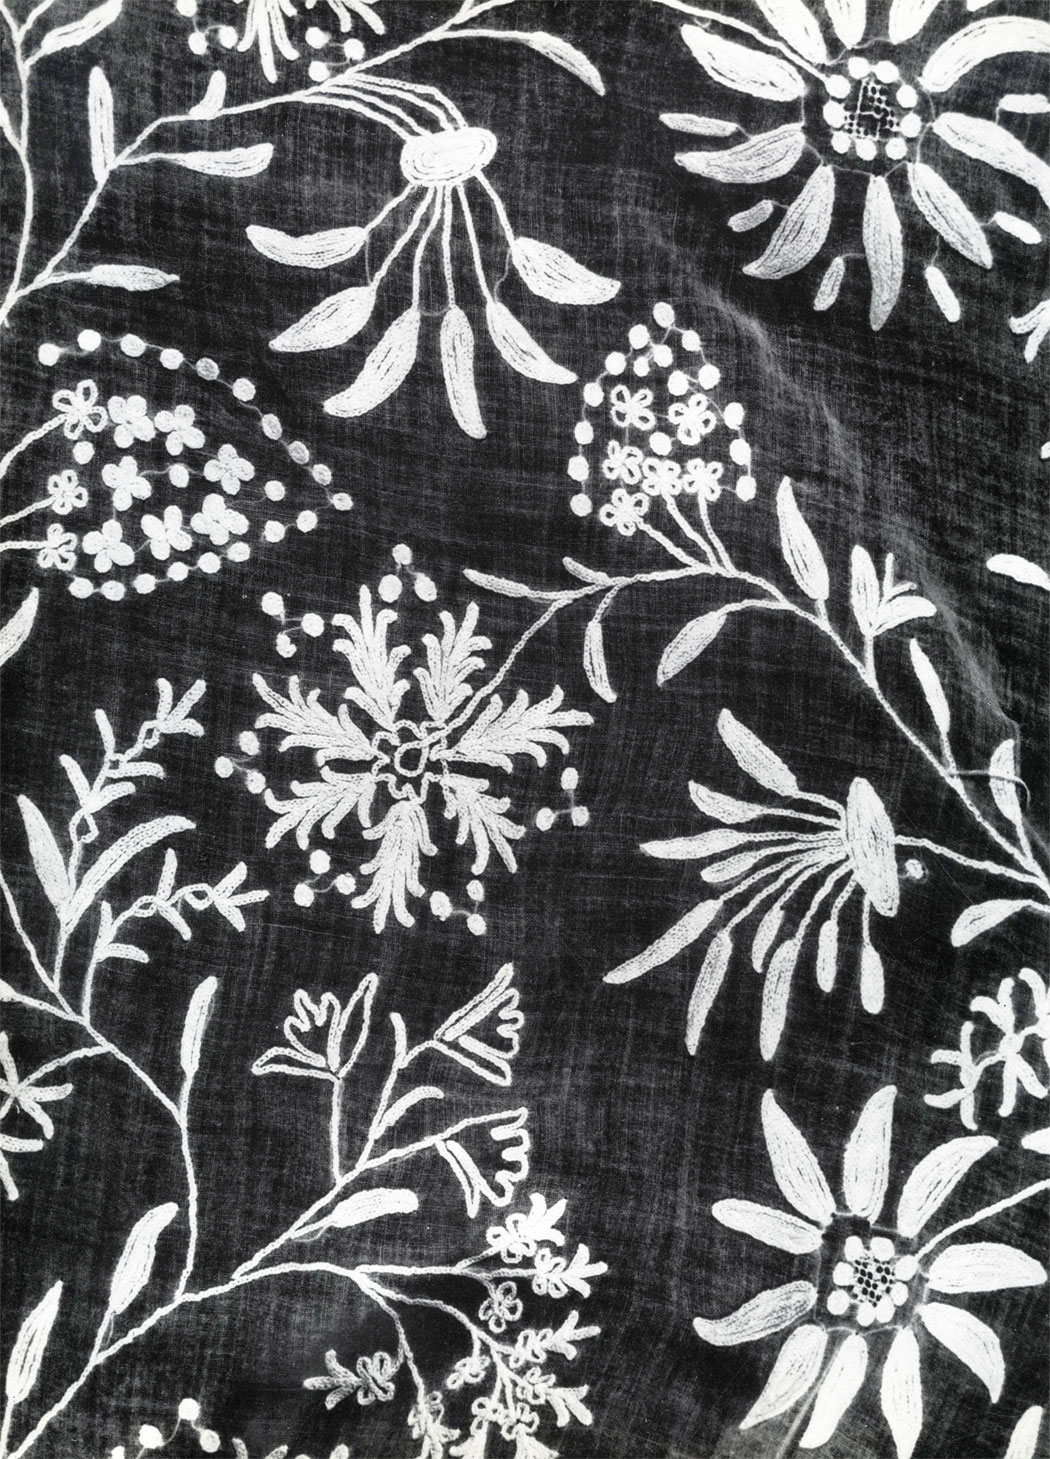 Detail of a woman's shirt sleeve. Early 19th century. RT-17255